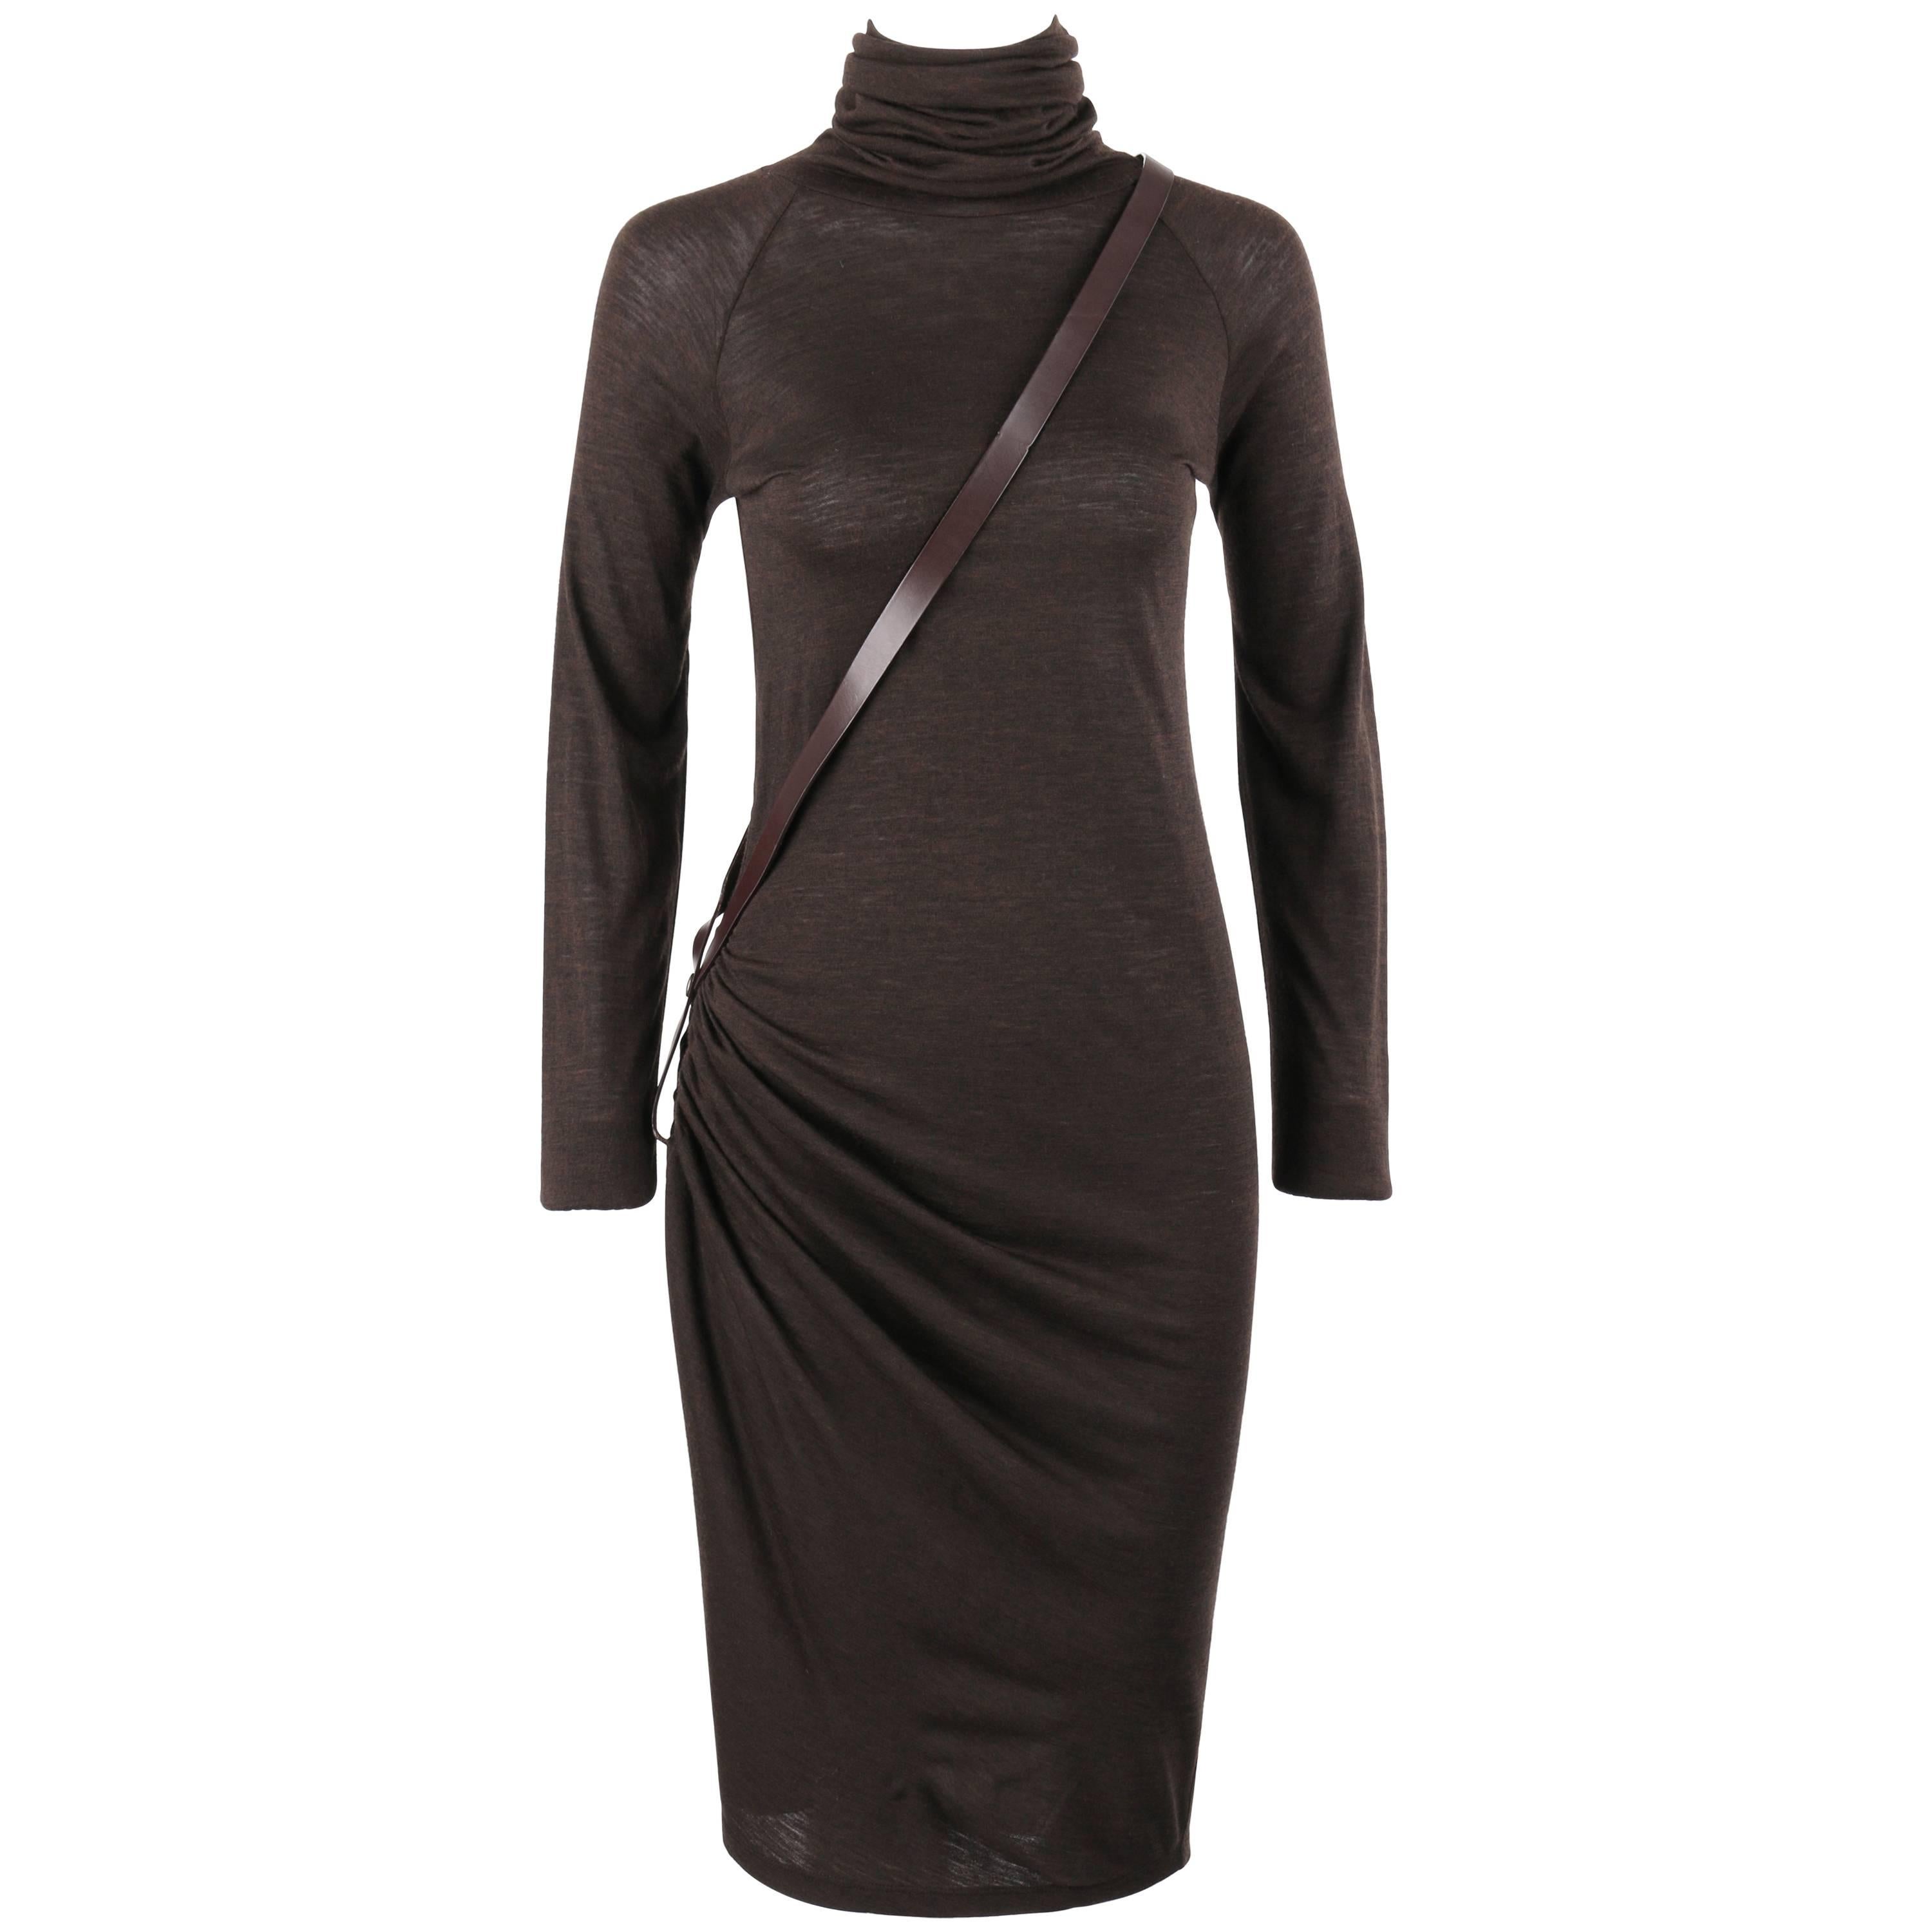 JEAN PAUL GAULTIER Classique S/S 2007 Wool Knit Crossbody Belted Cocktail Dress For Sale